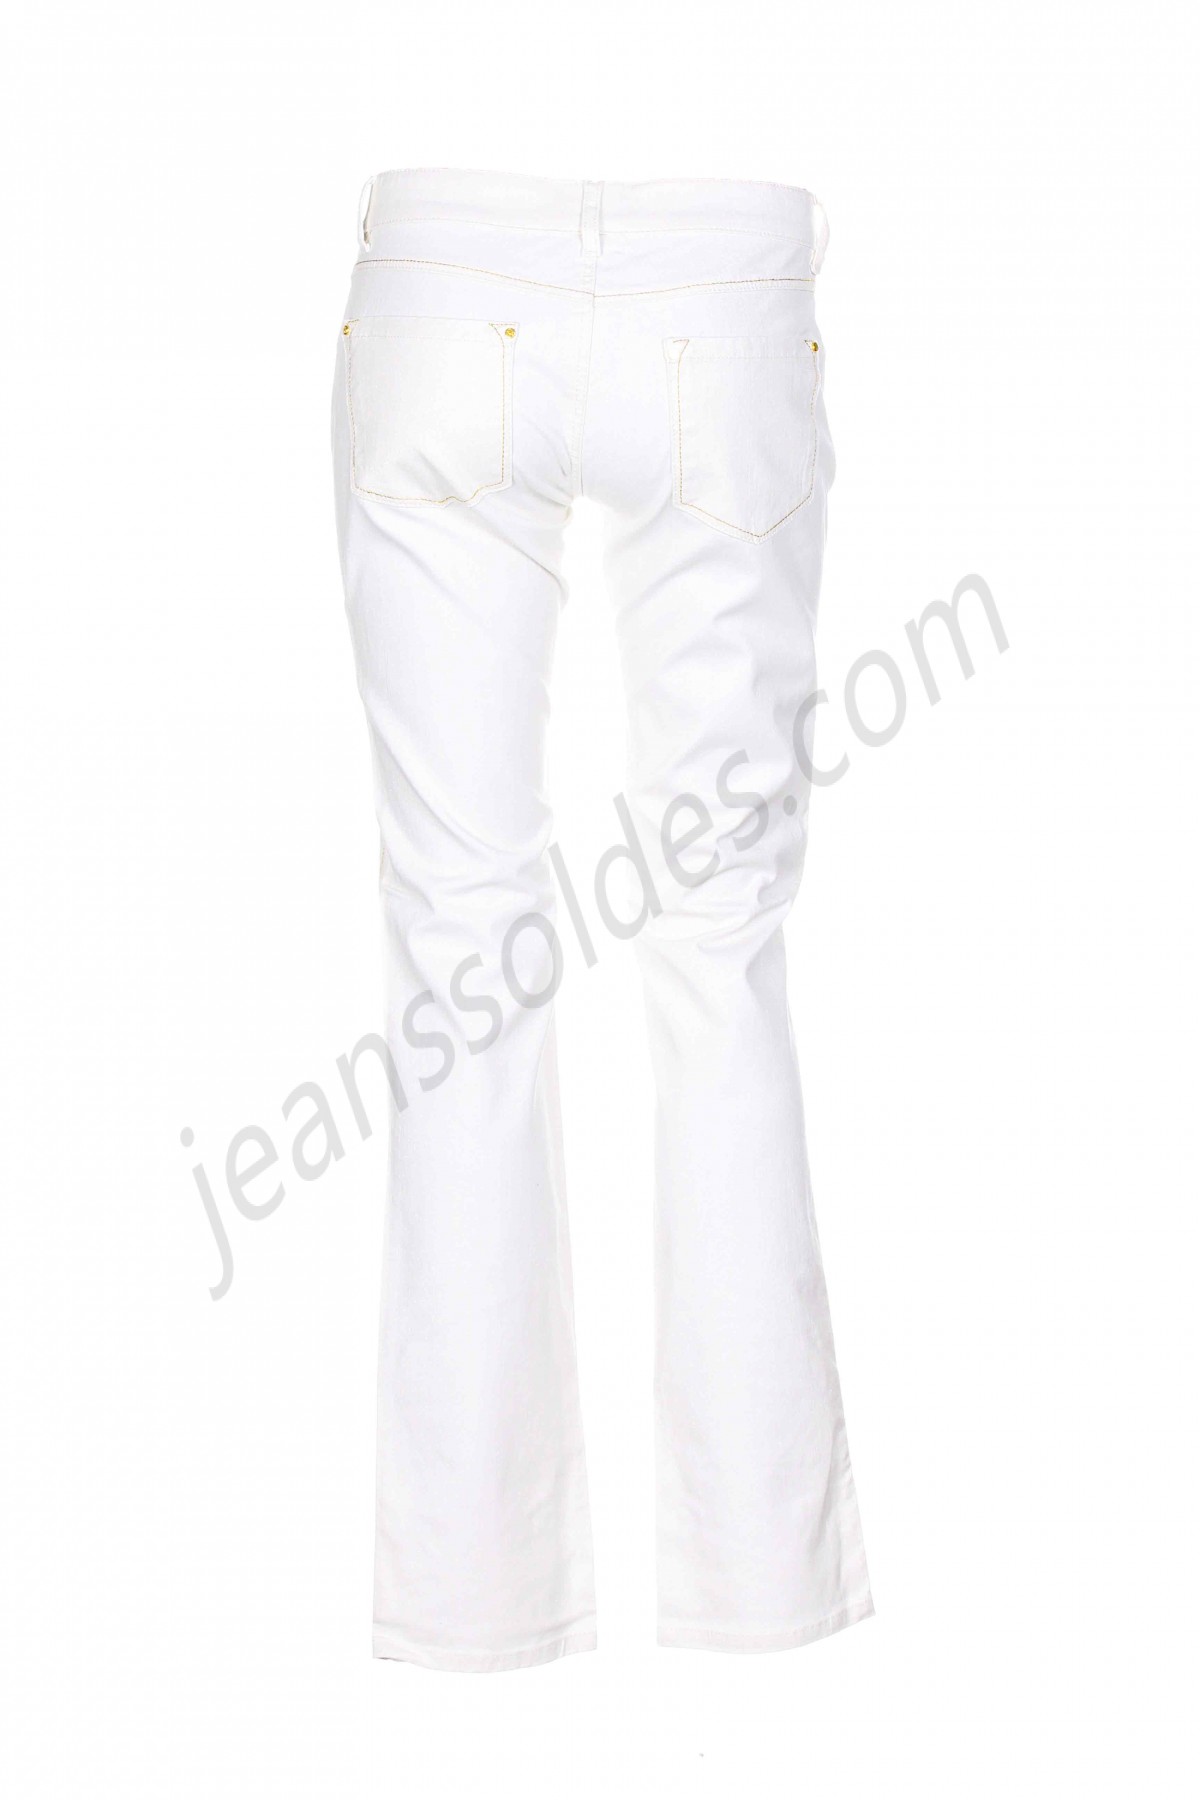 n&vy-Jeans coupe slim prix d’amis - -1